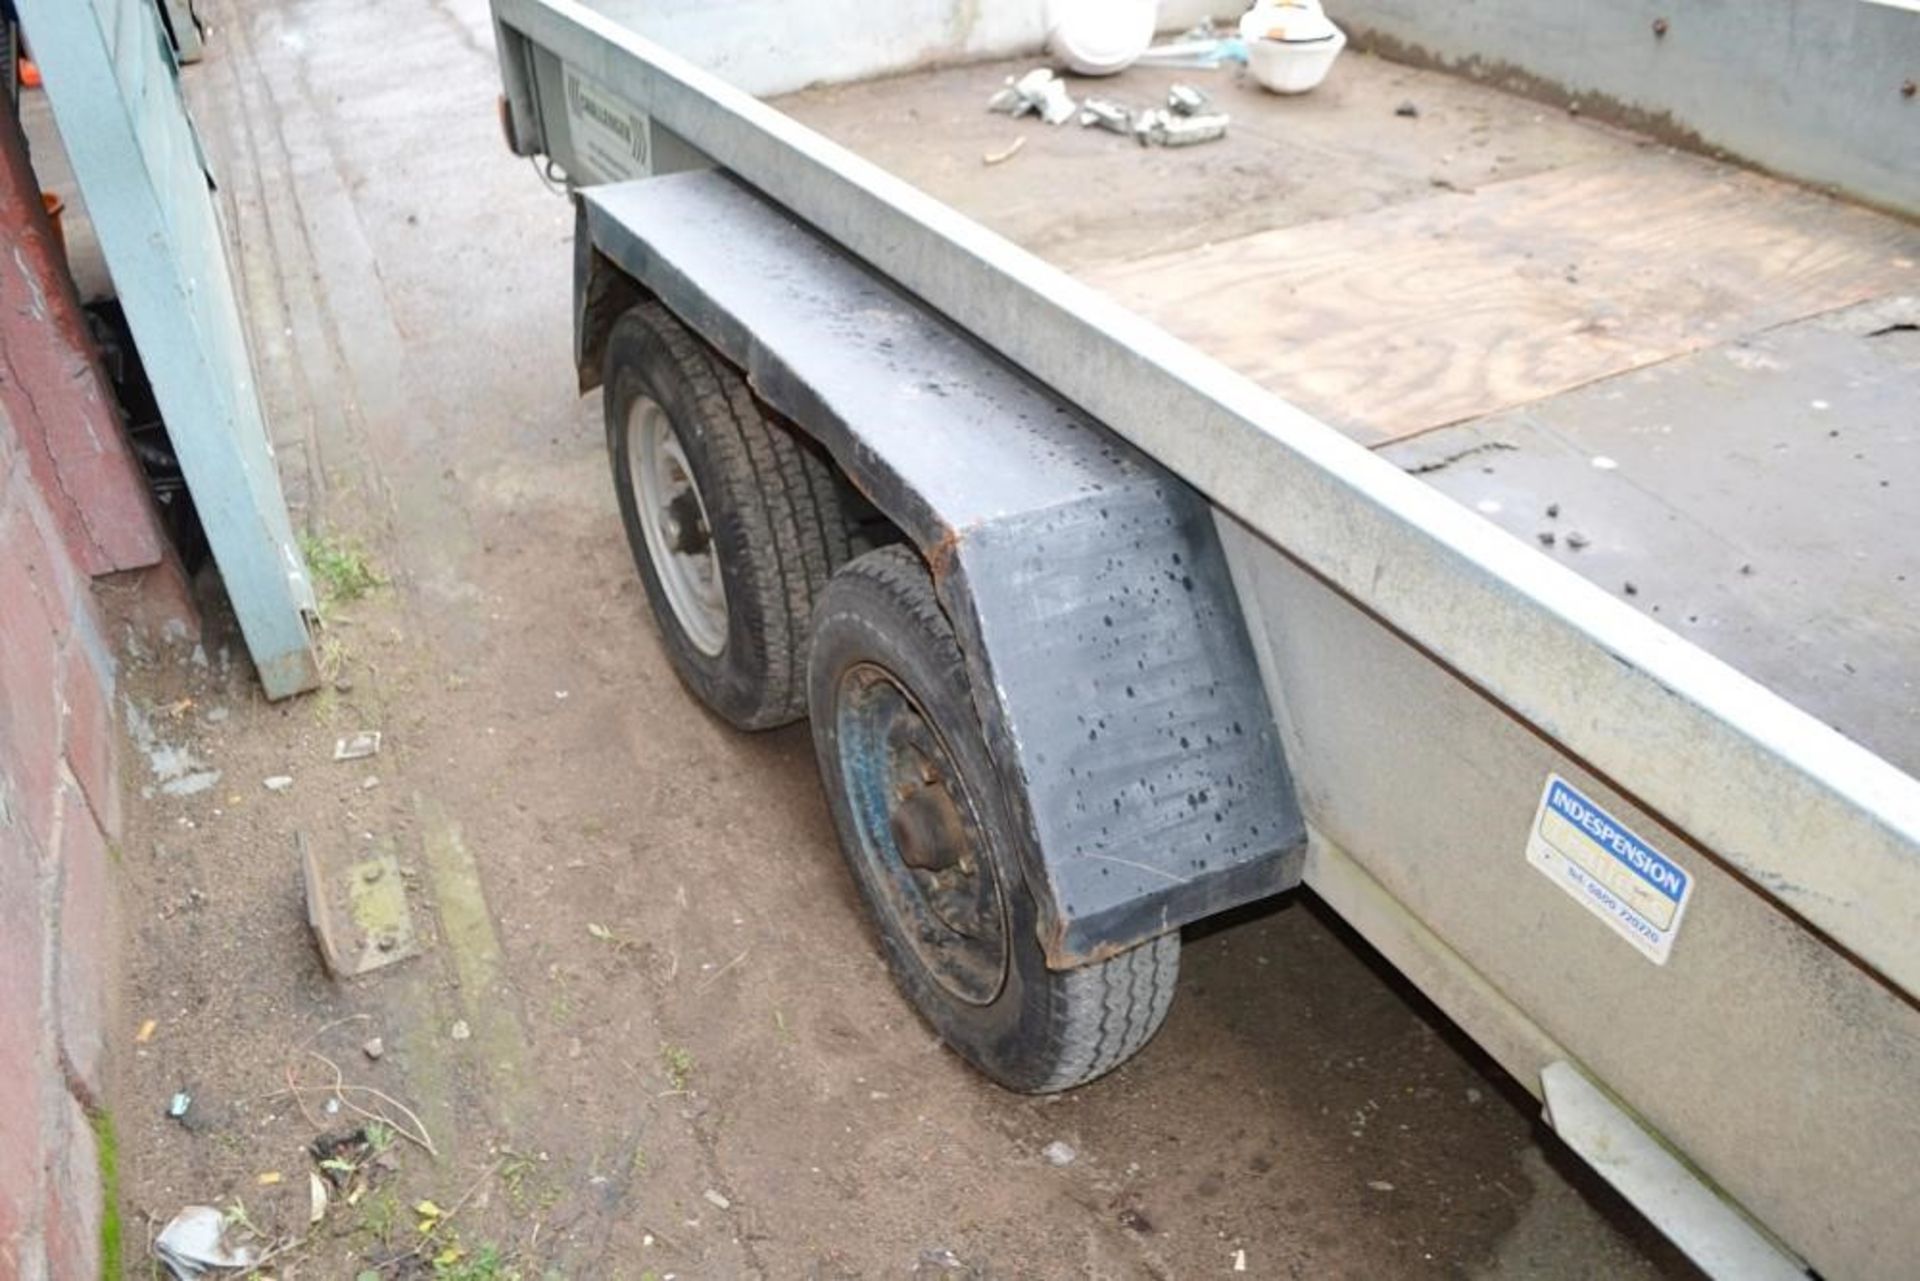 1 x Challenger Indespension 10ft Trailer With 2300Kg Gross Weight - CL464 - Location:Liverpool L19 - Image 7 of 25